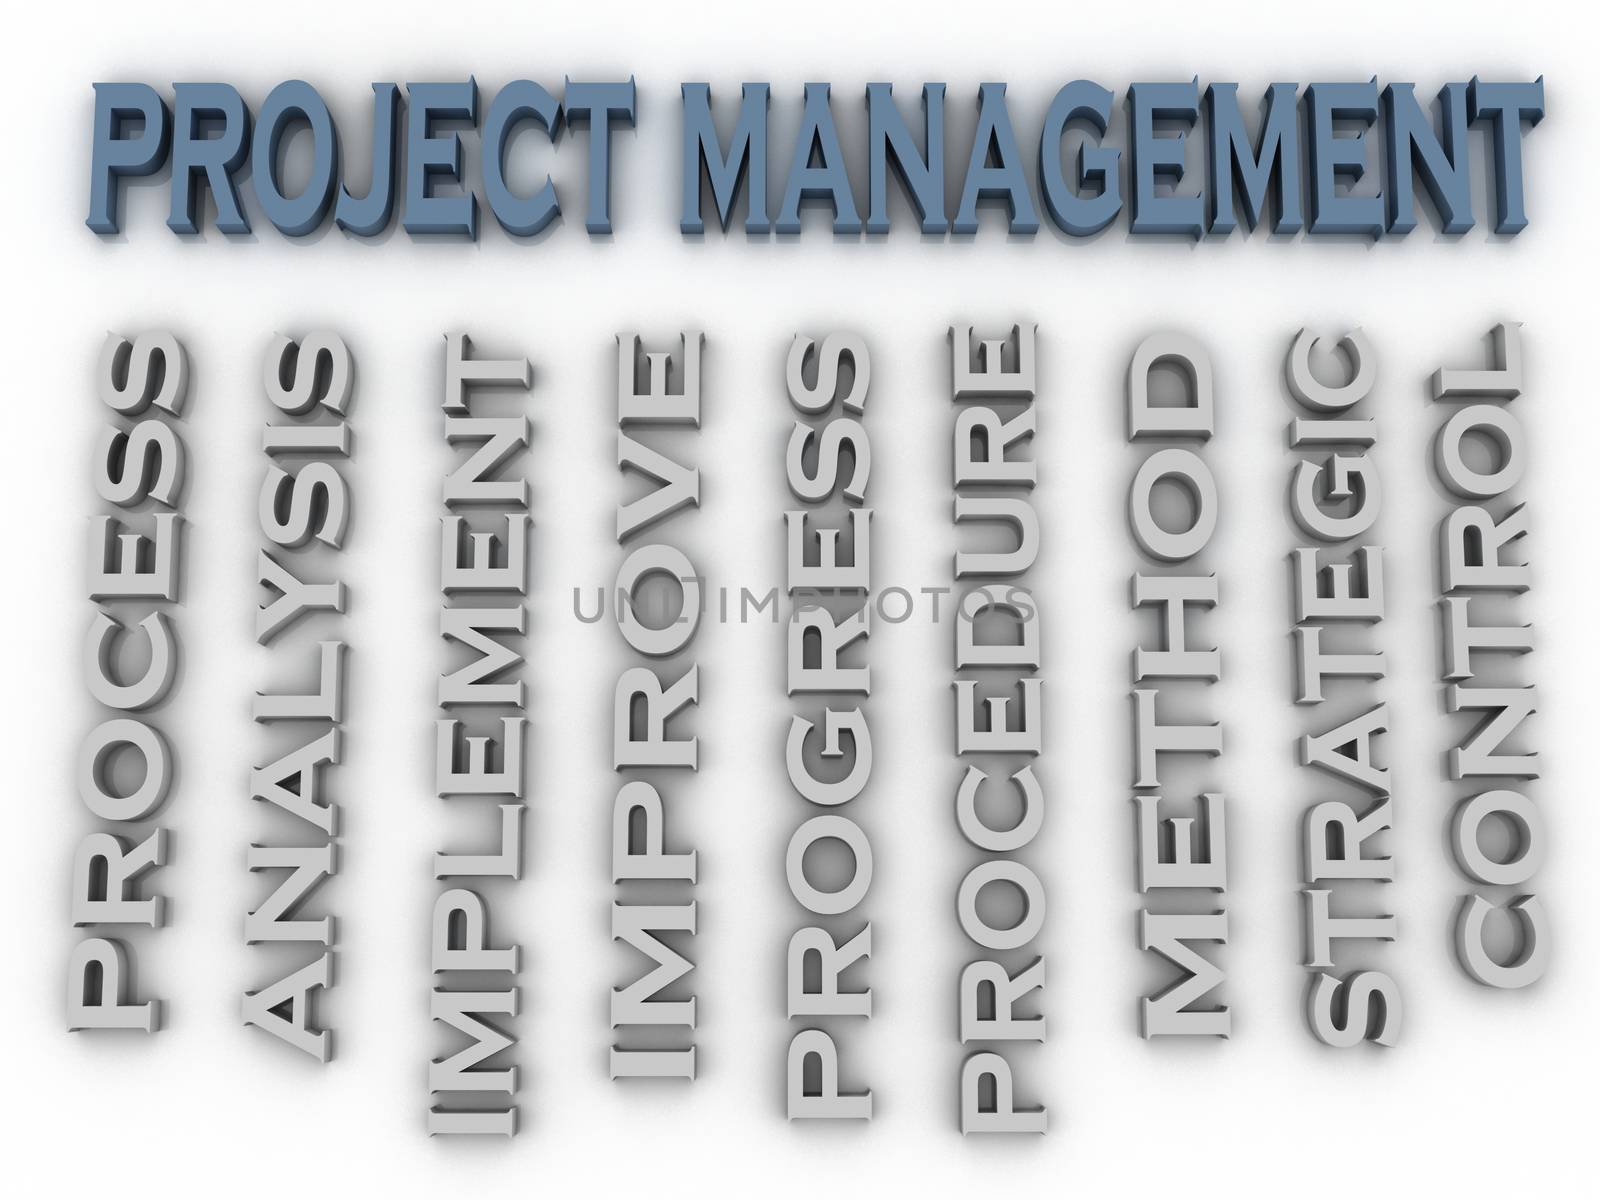 3d image Project management issues concept word cloud background by dacasdo